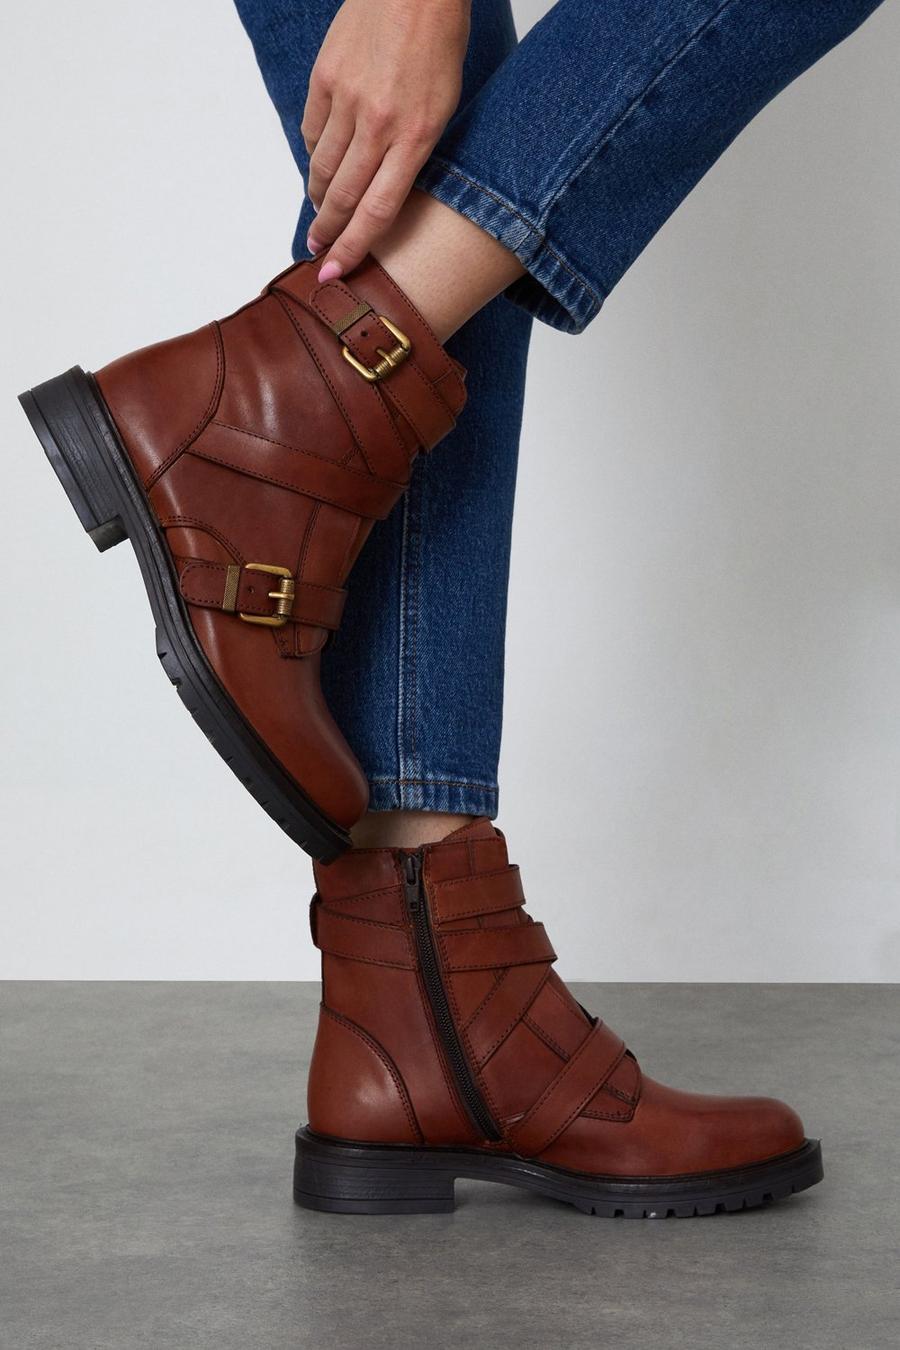 Good For The Sole: Rowan Double Strap Leather Biker Boots